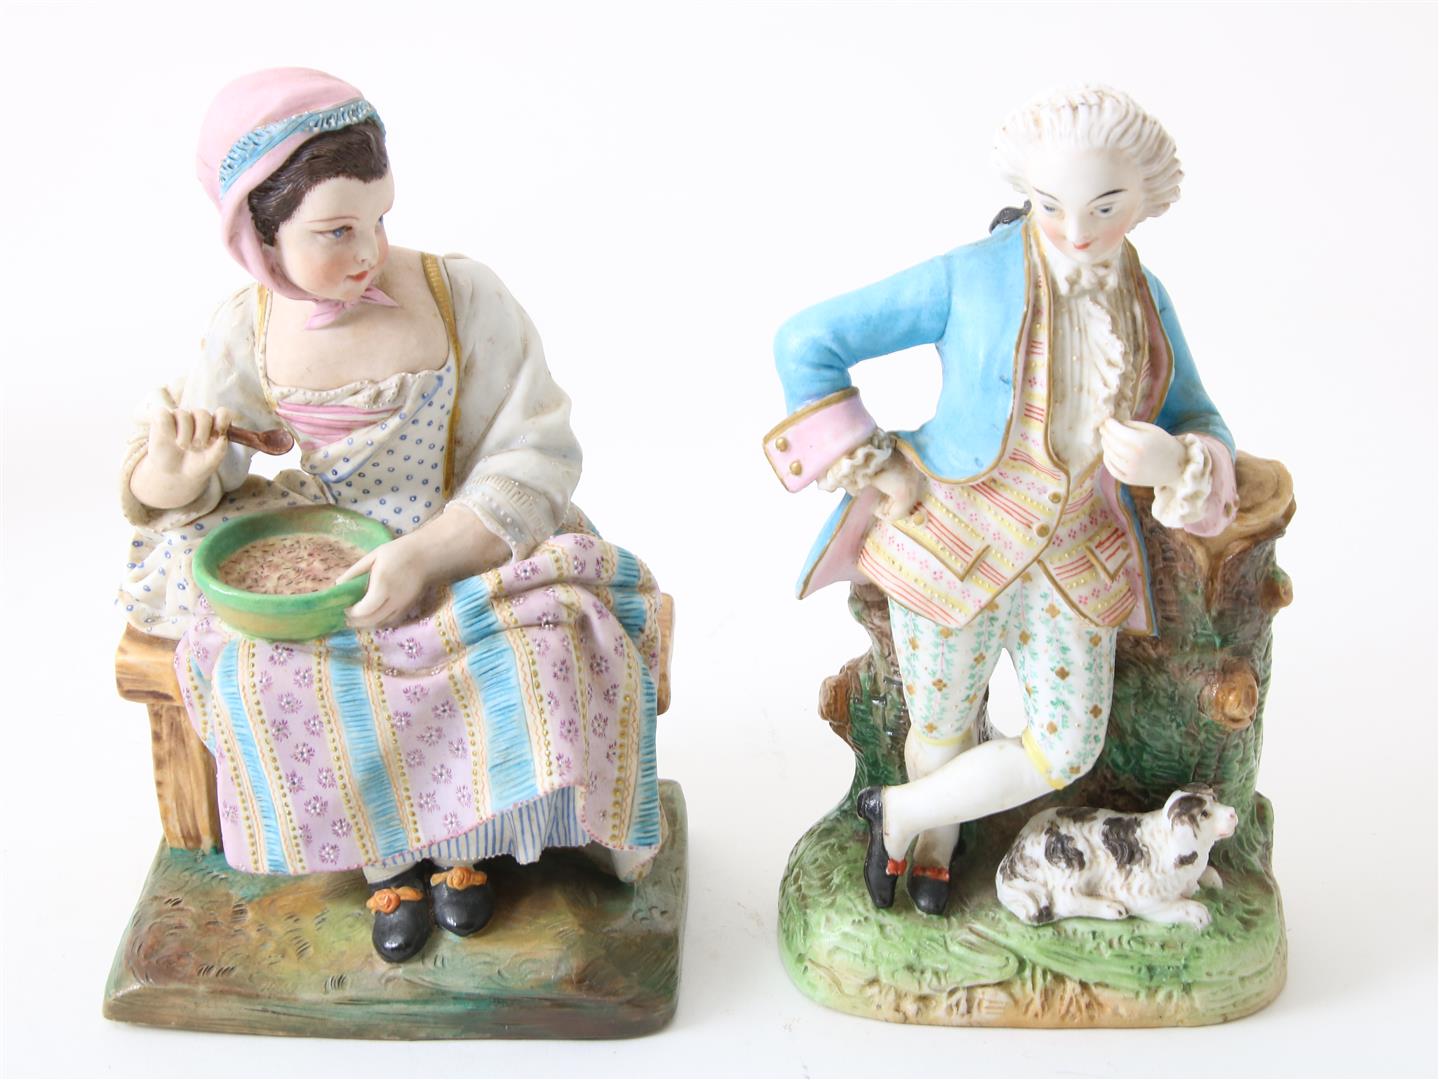 Lot of a polychrome biscuit porcelain sculpture group of 2 children with a dog on a chair, height 28 - Image 3 of 5